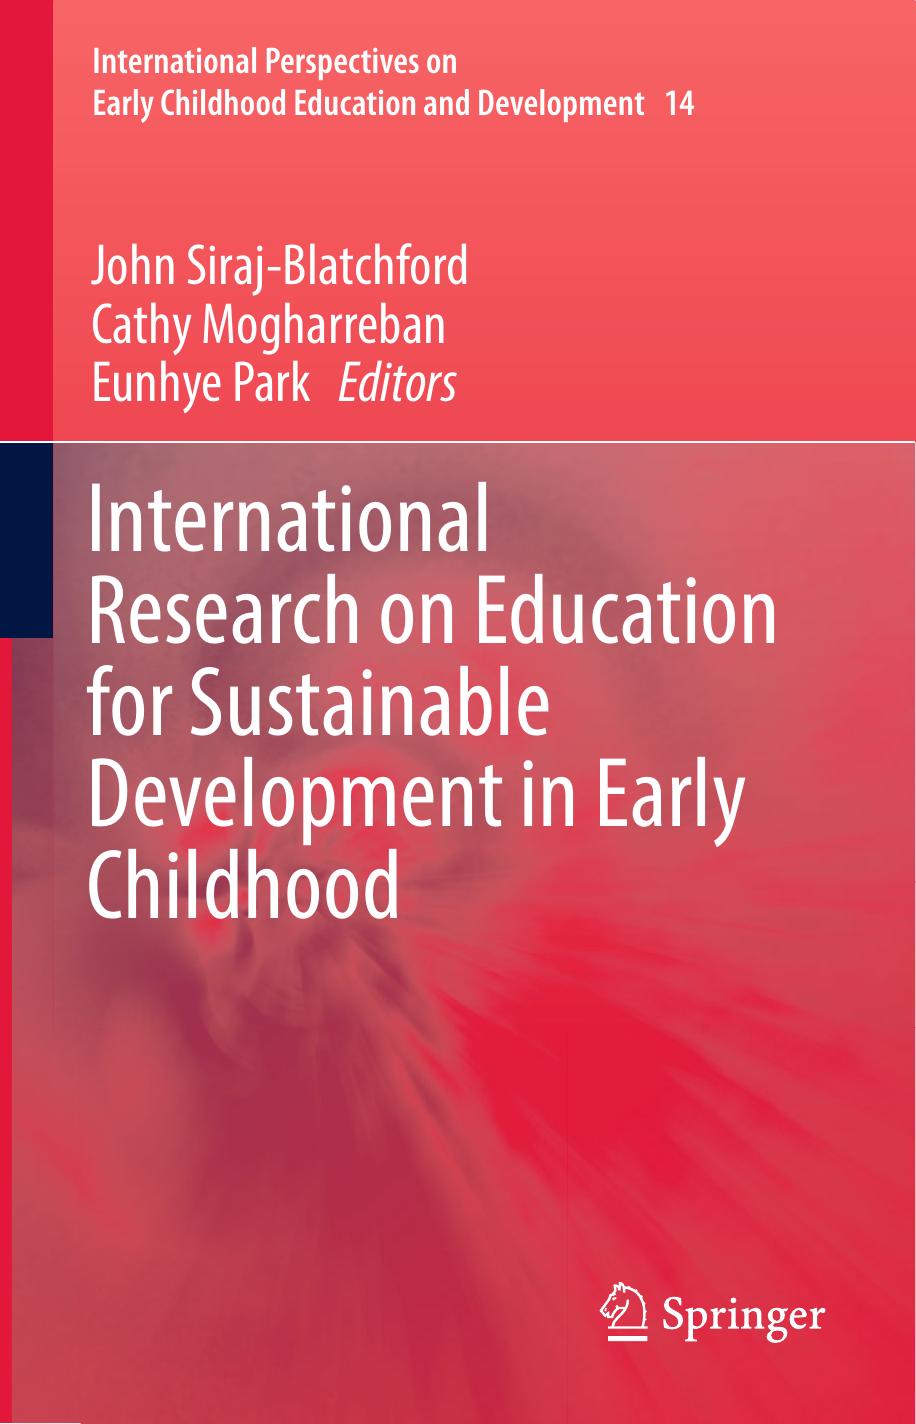 International Research on Education for Sustainable Development 2016